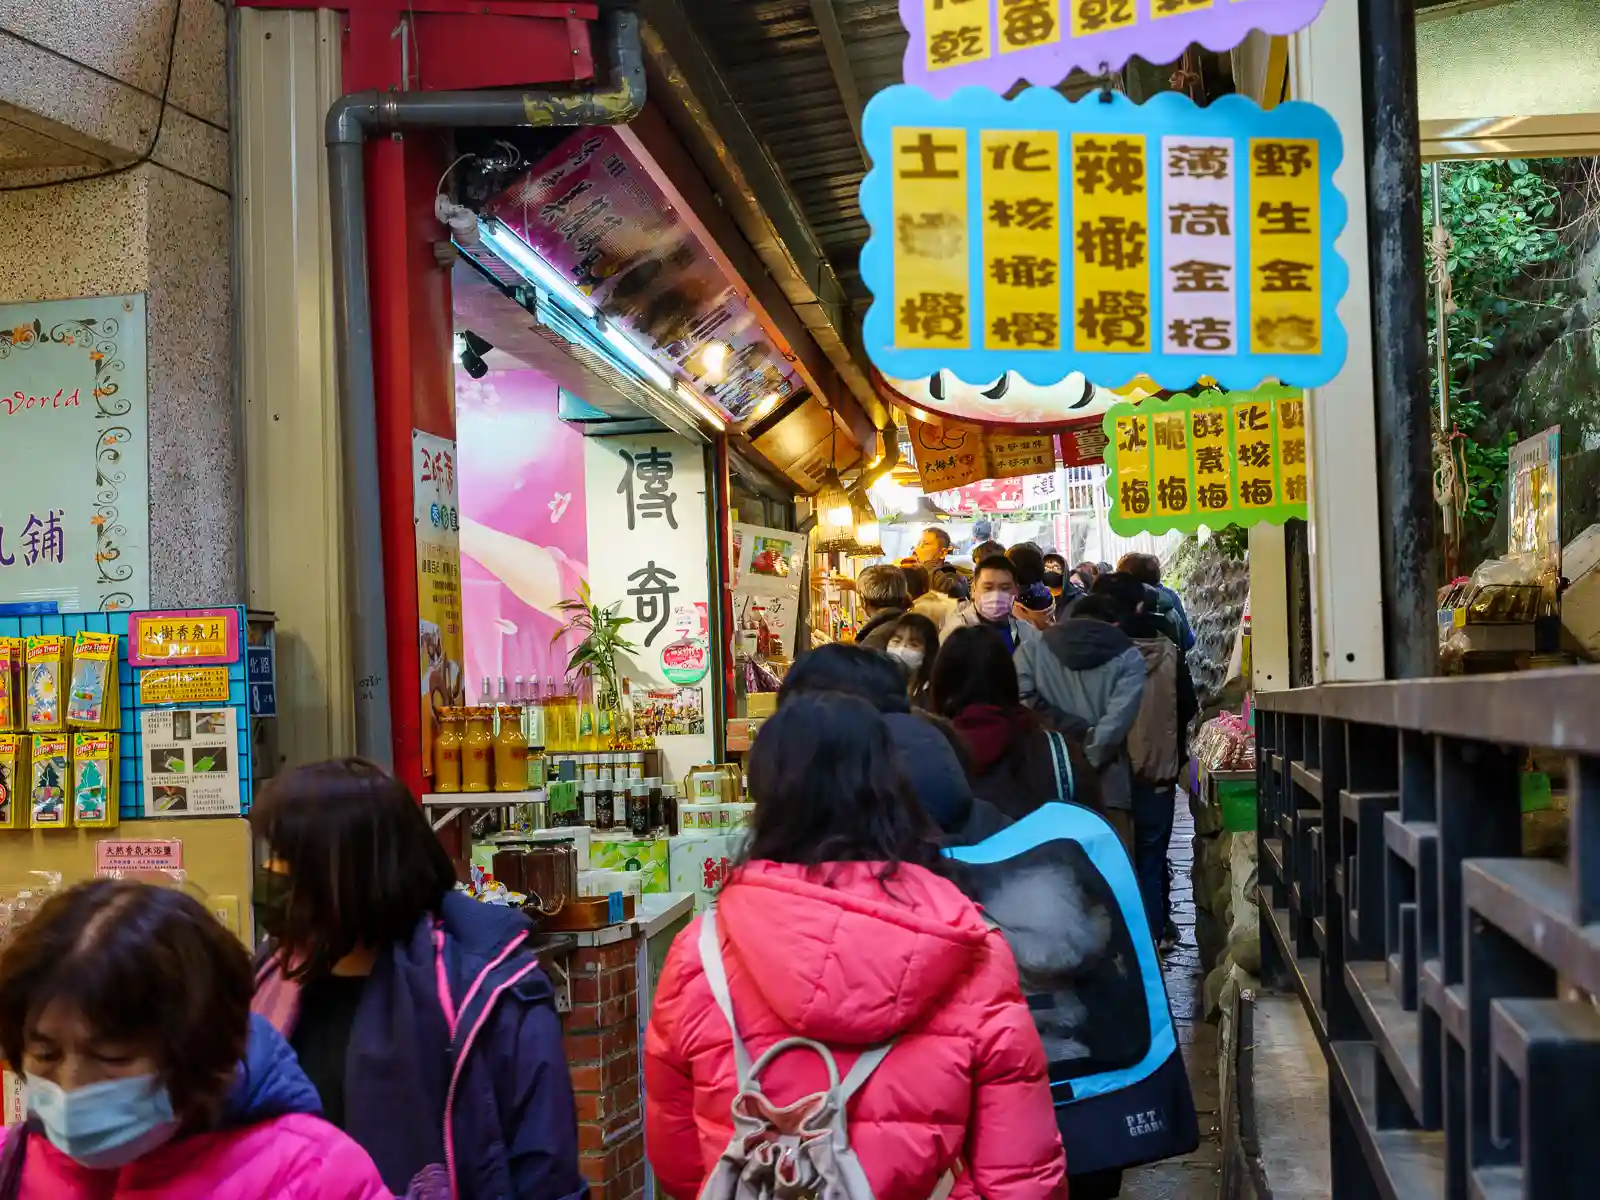 Colorful signs advertise food, snacks, and local specialties on either side of a narrow alley.